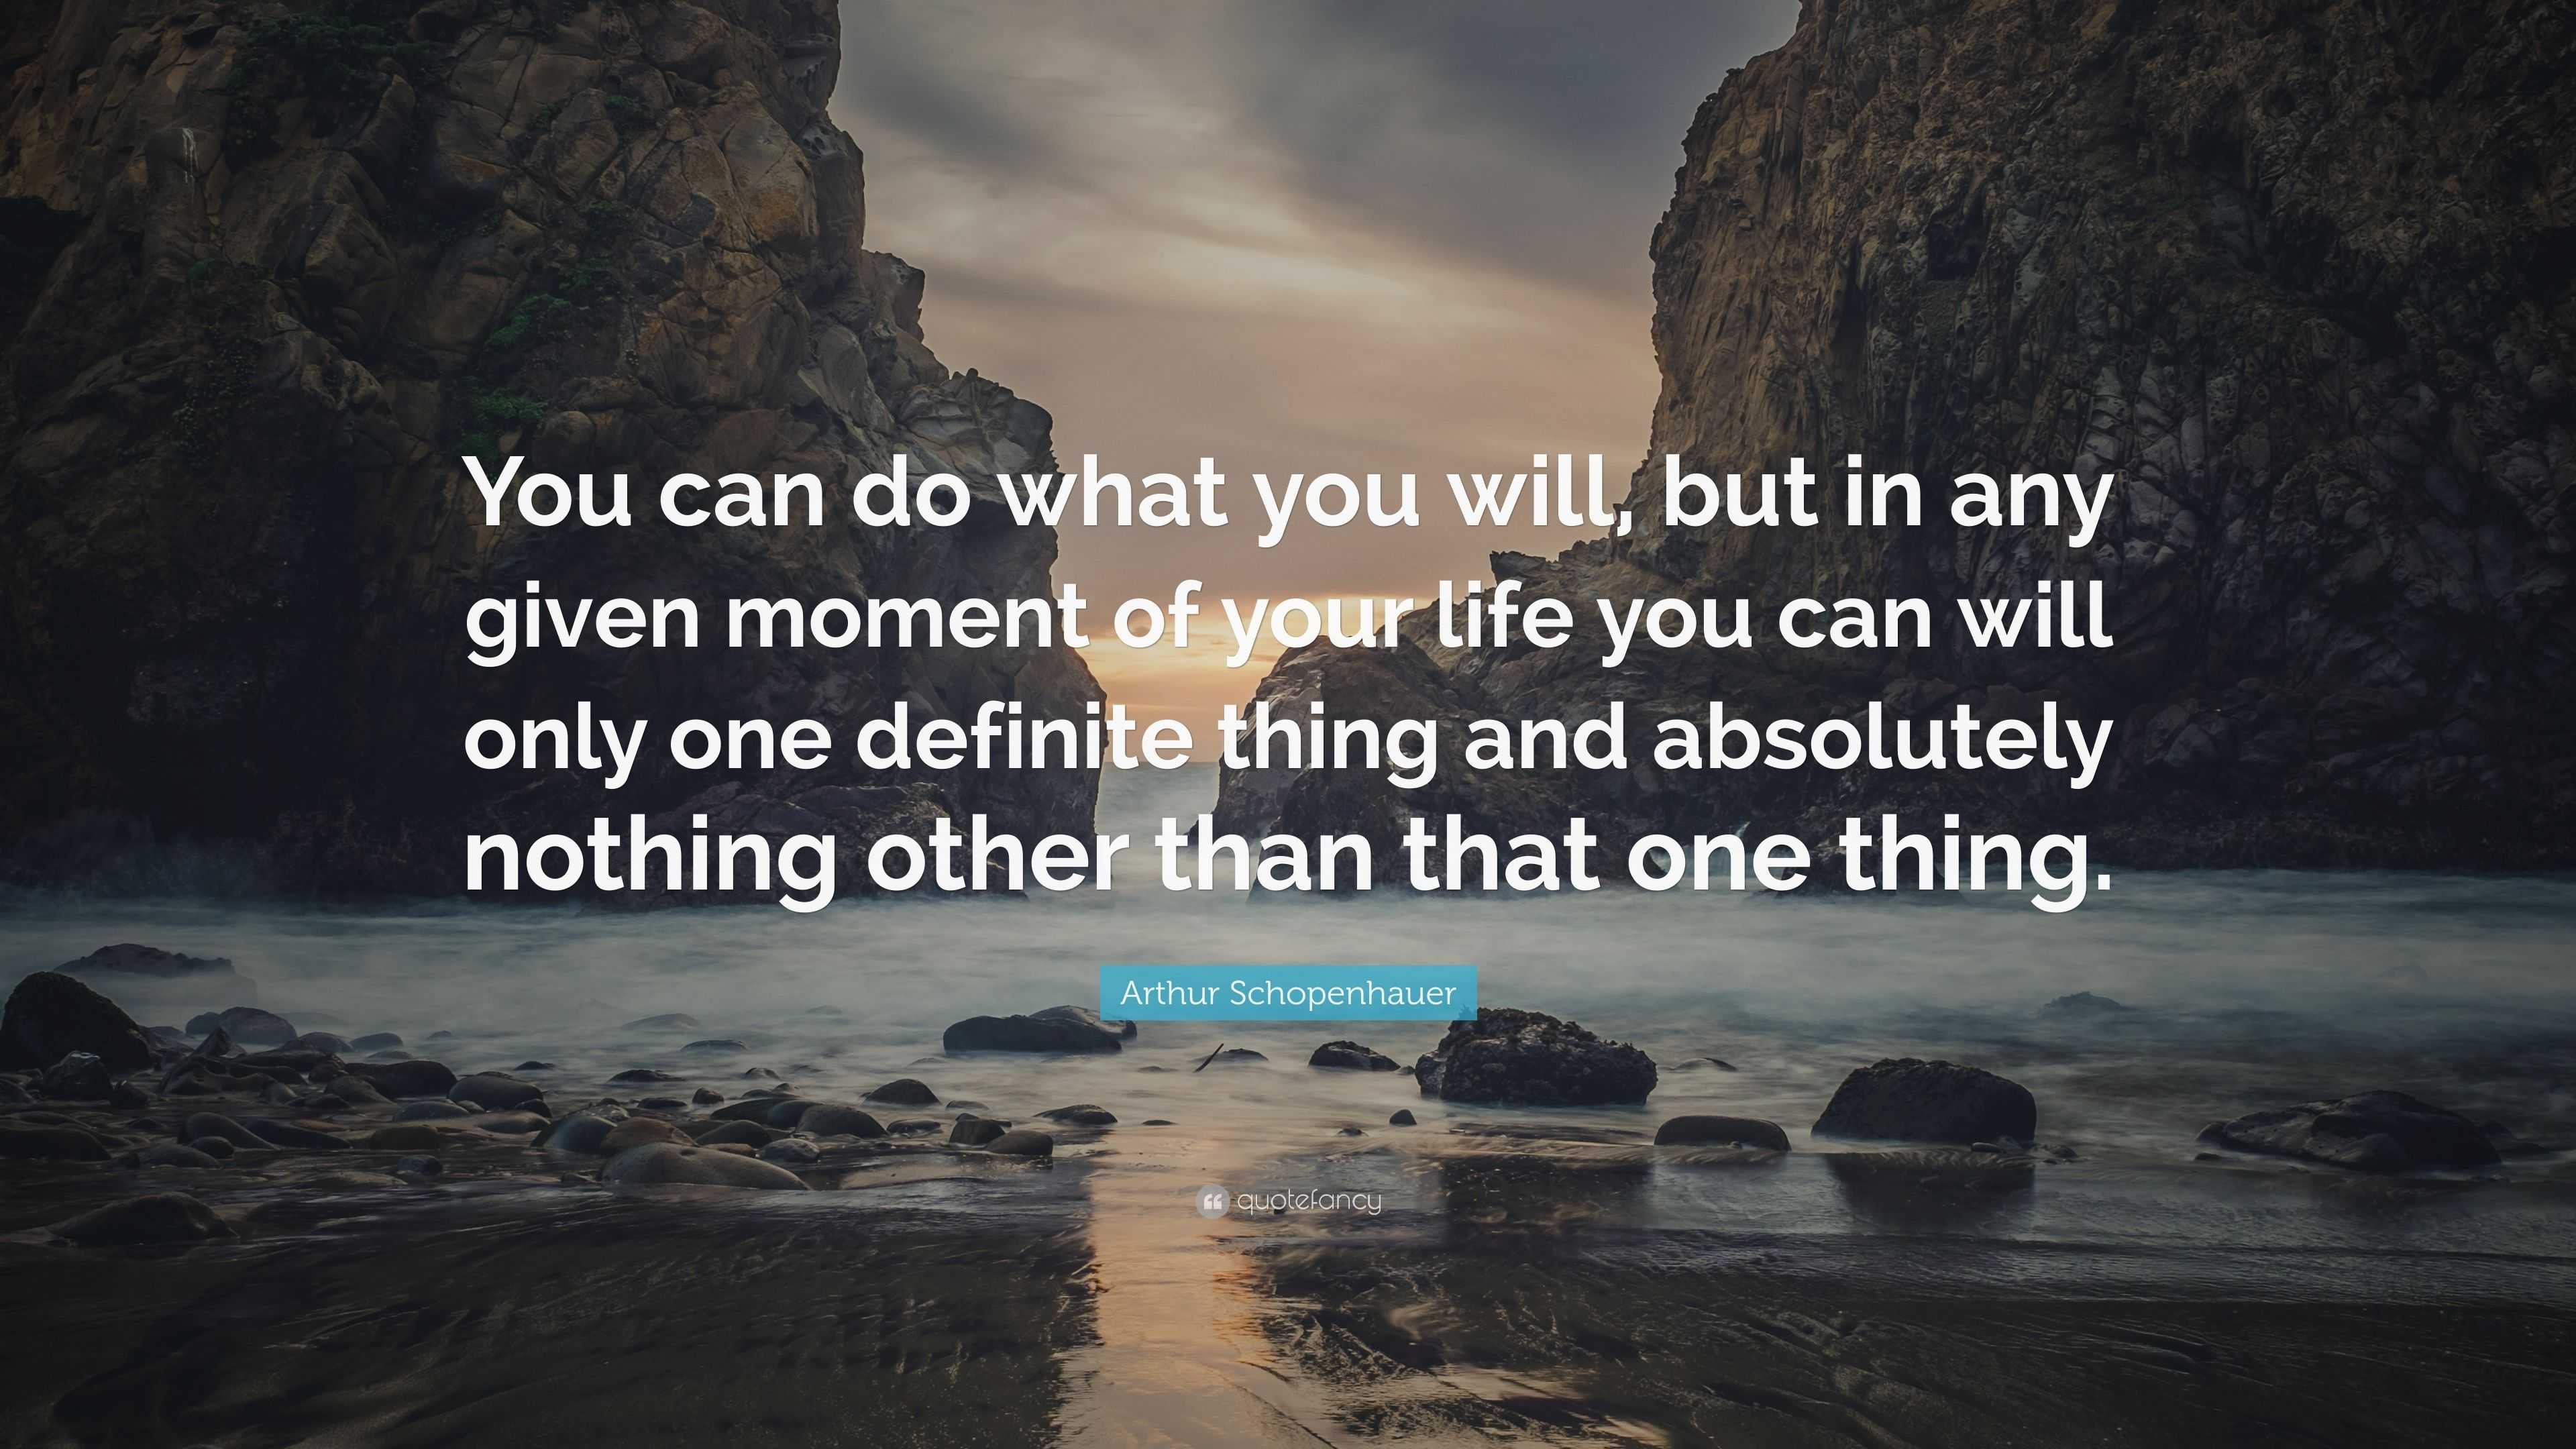 Arthur Schopenhauer Quote: “You can do what you will, but in any given ...